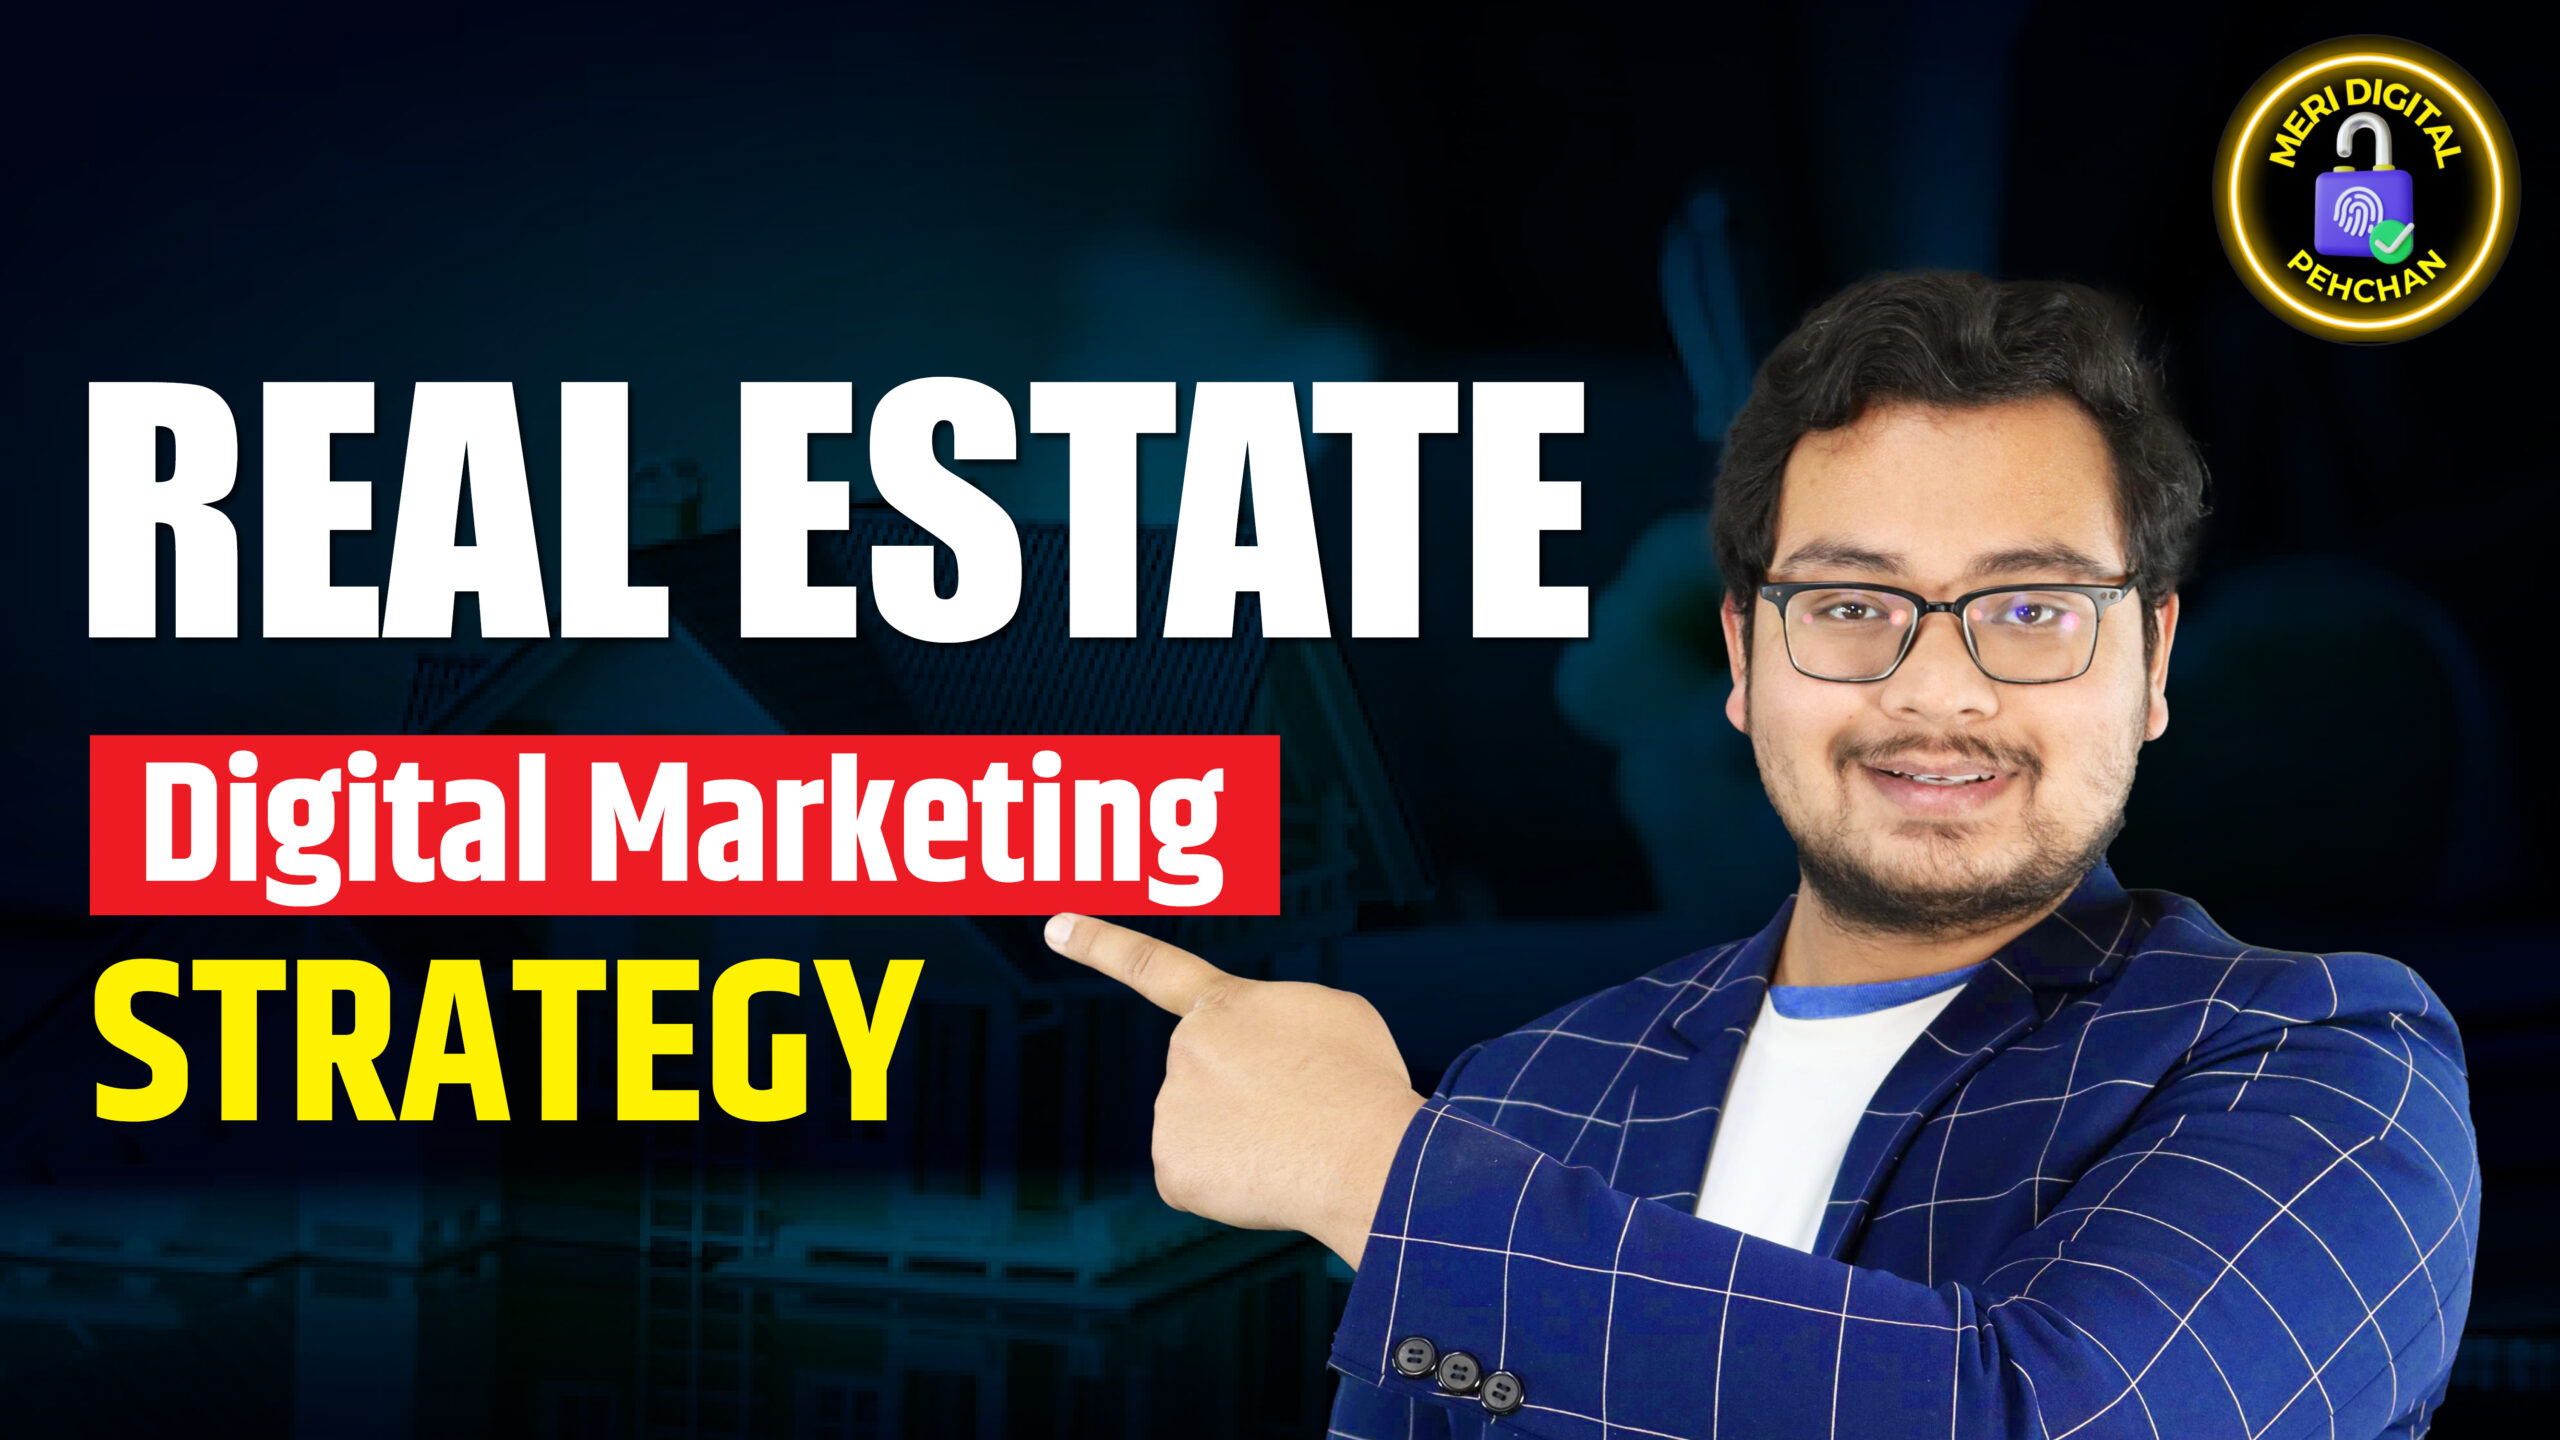 Real Estate Digital Marketing Strategy and Tips